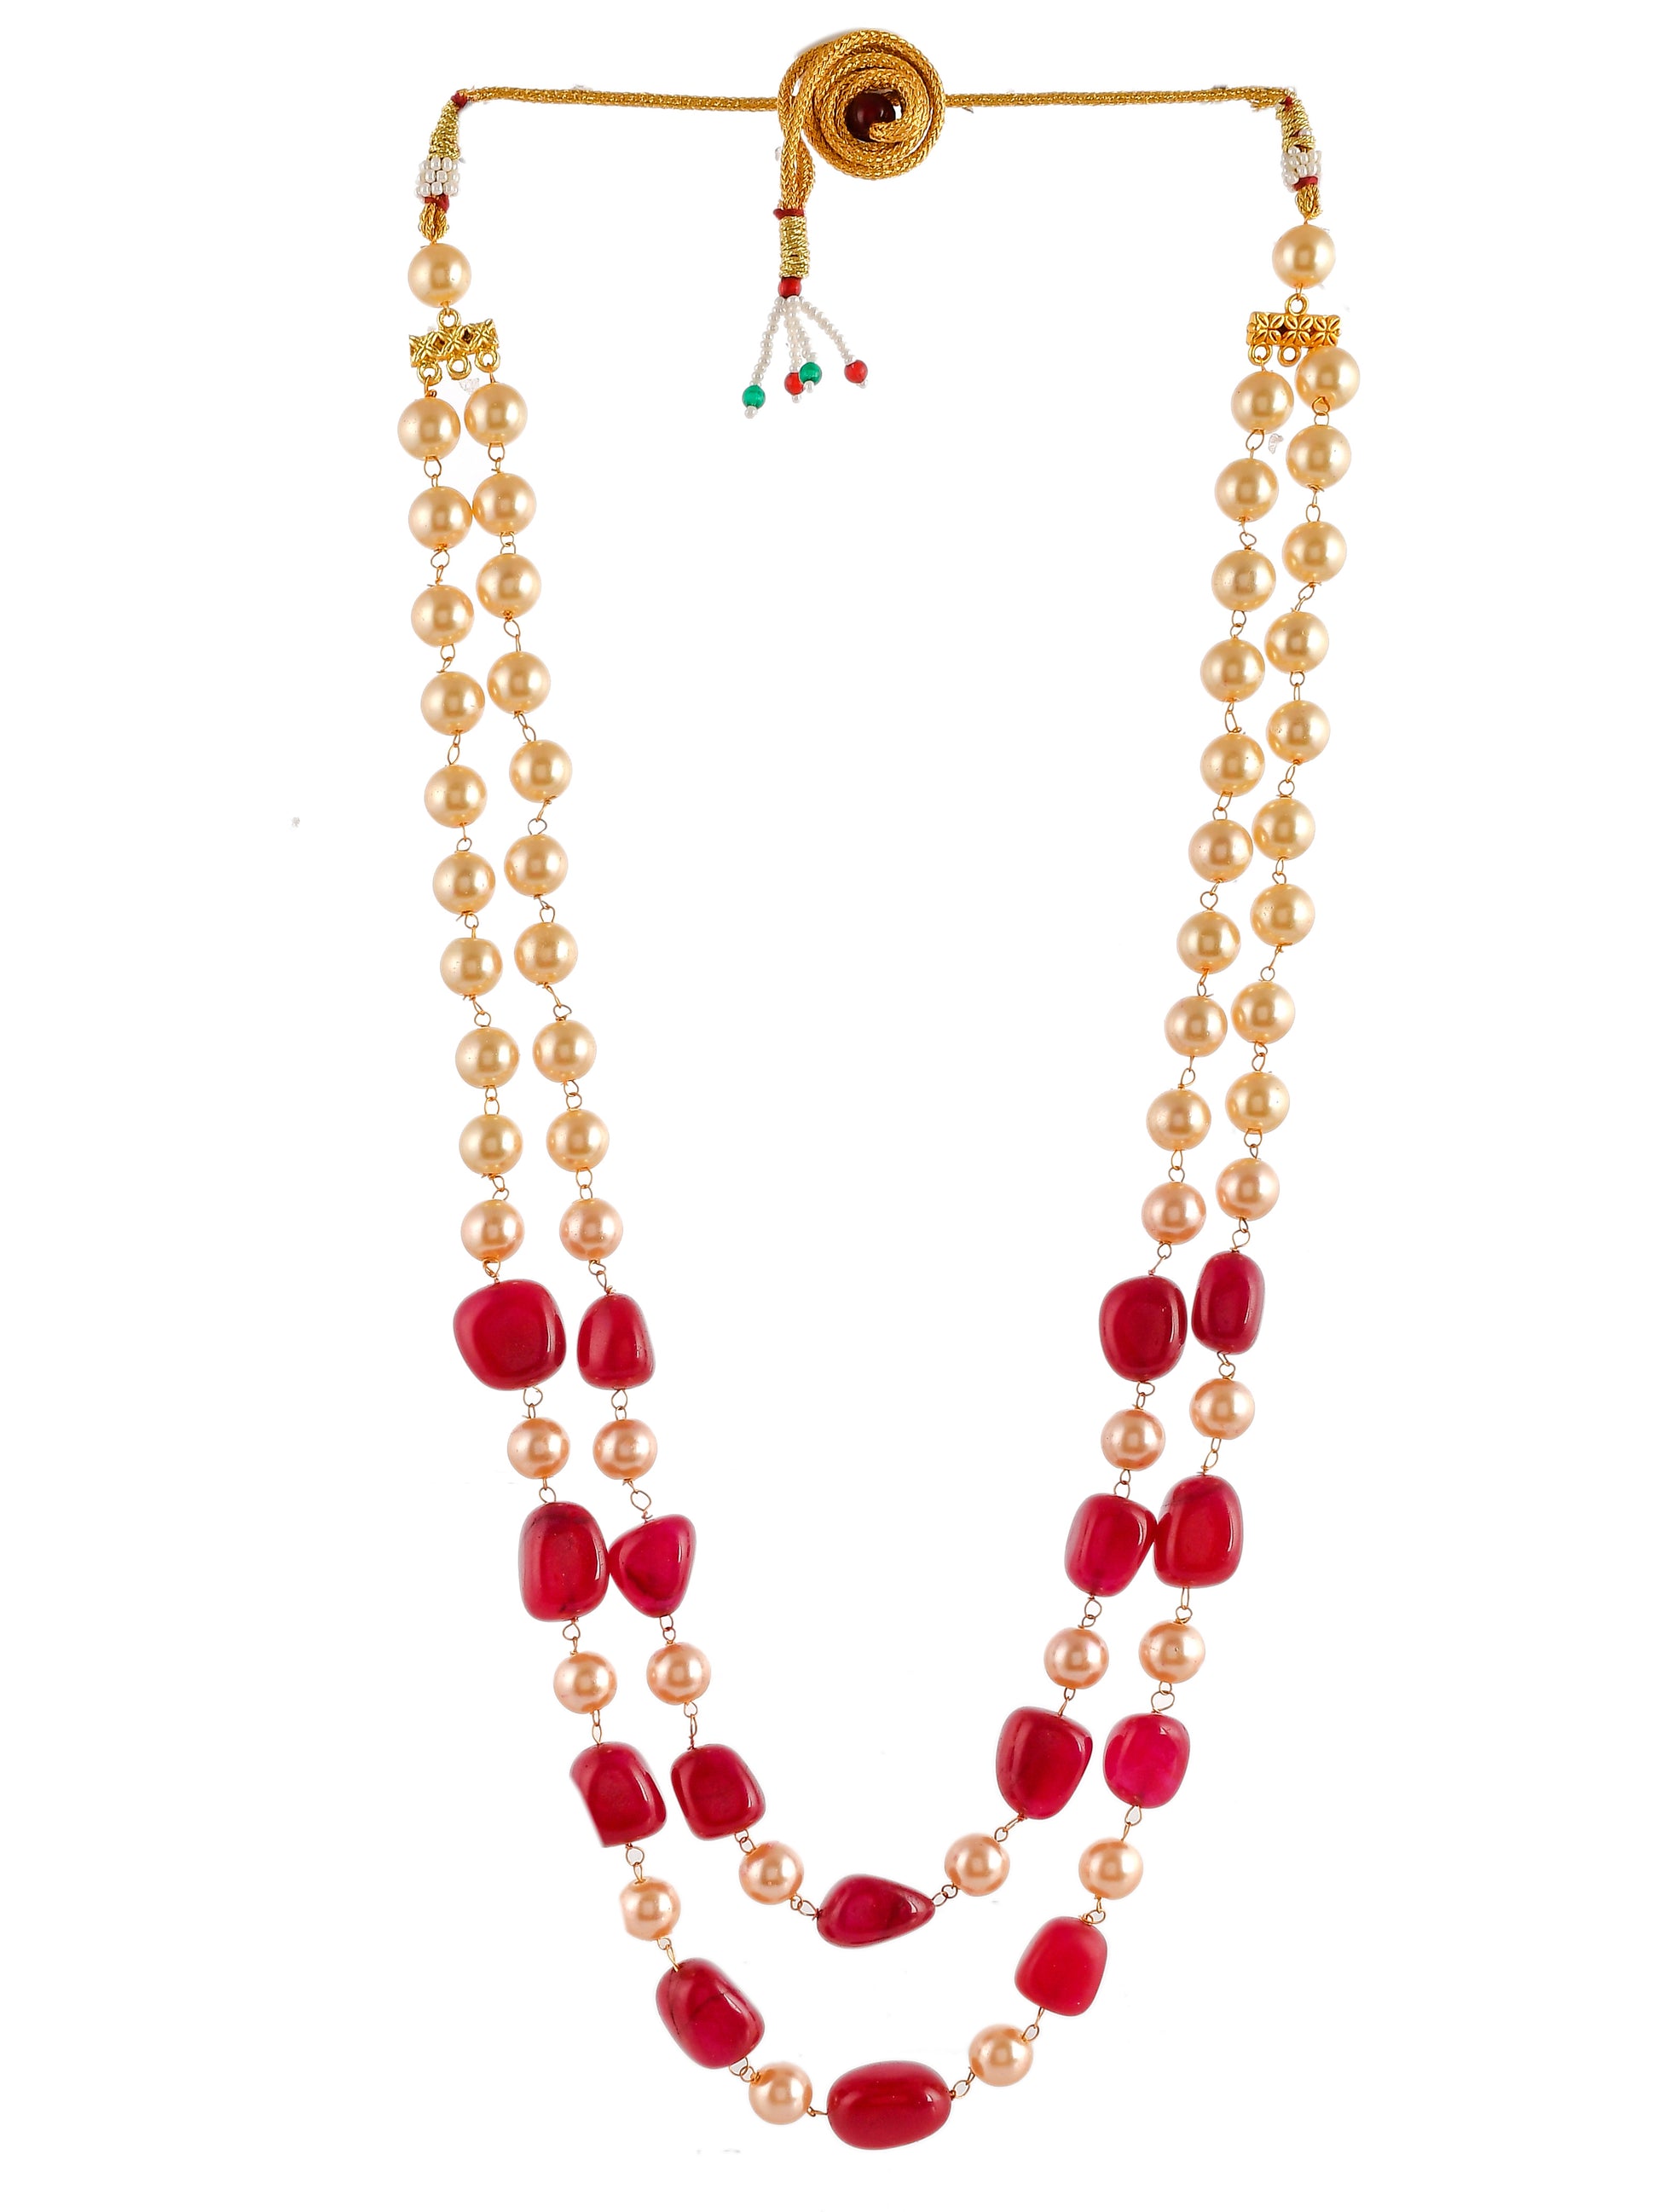 Unisex Red Gold Plated Beaded Layered Necklace